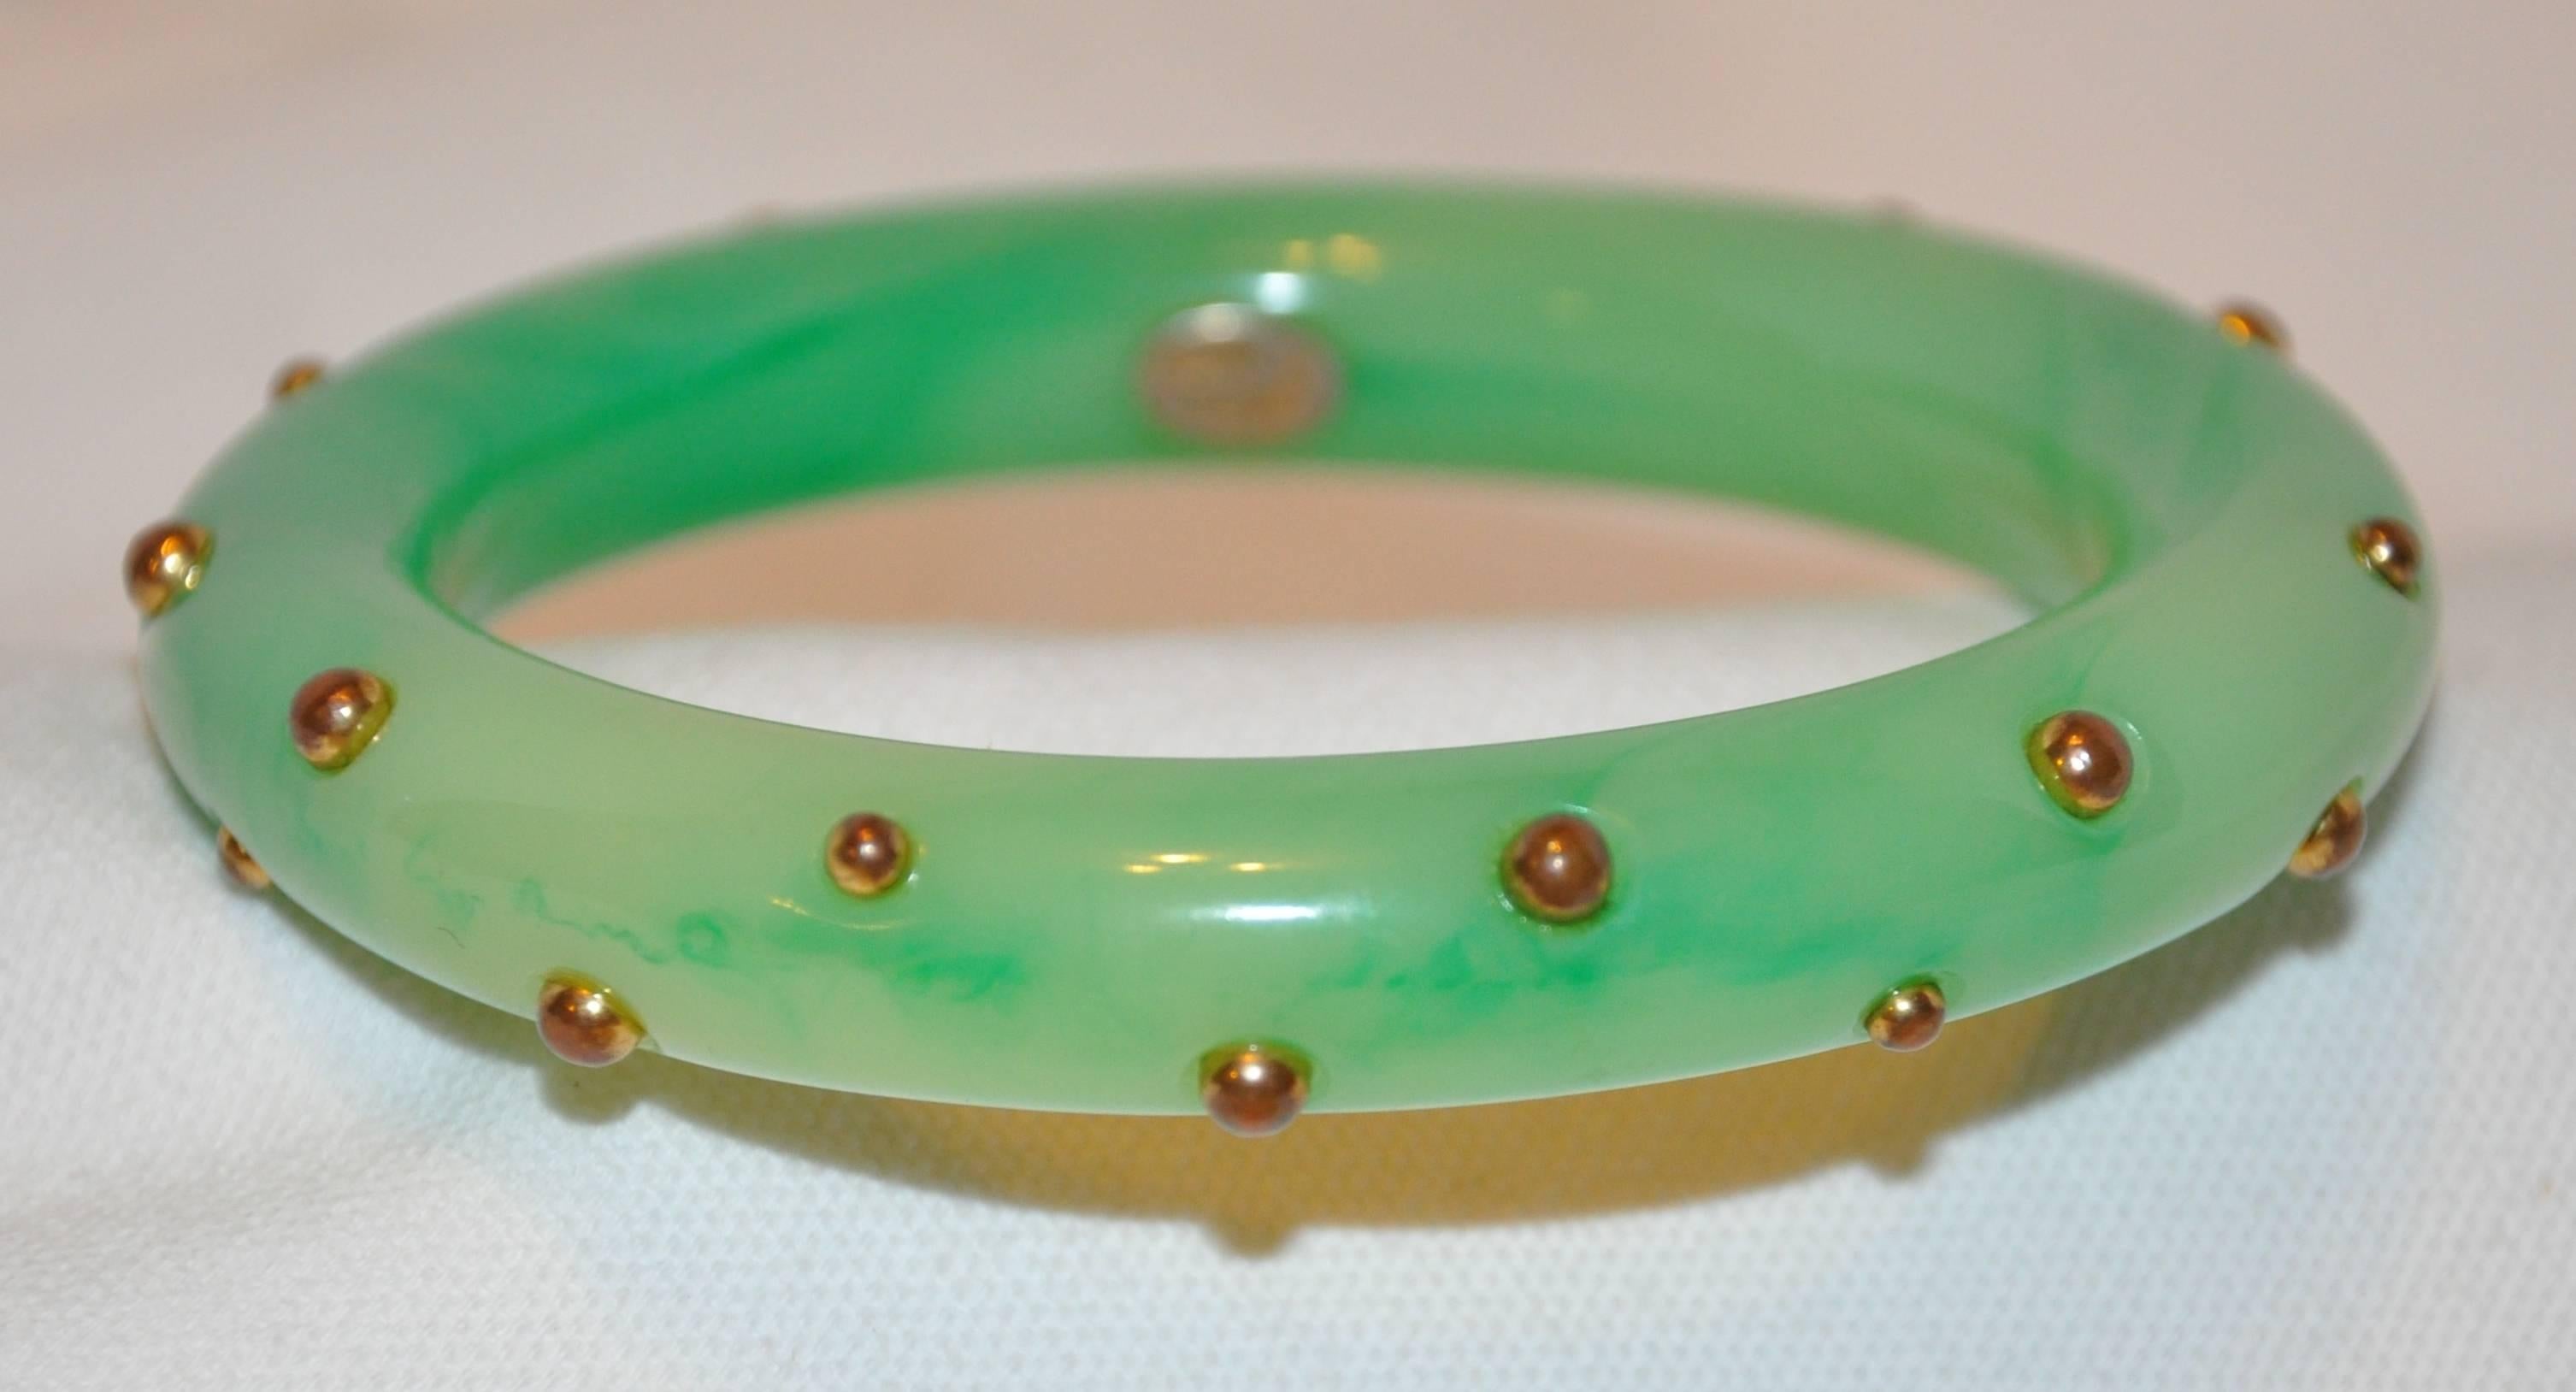        Kenneth Jay Lane wonderfully whimsical faux Jadeite is highlighted with gold hardware studs throughout. The interior circumference measures 8", exterior circumference measures 11 5/8", depth measures 9/16", made in United